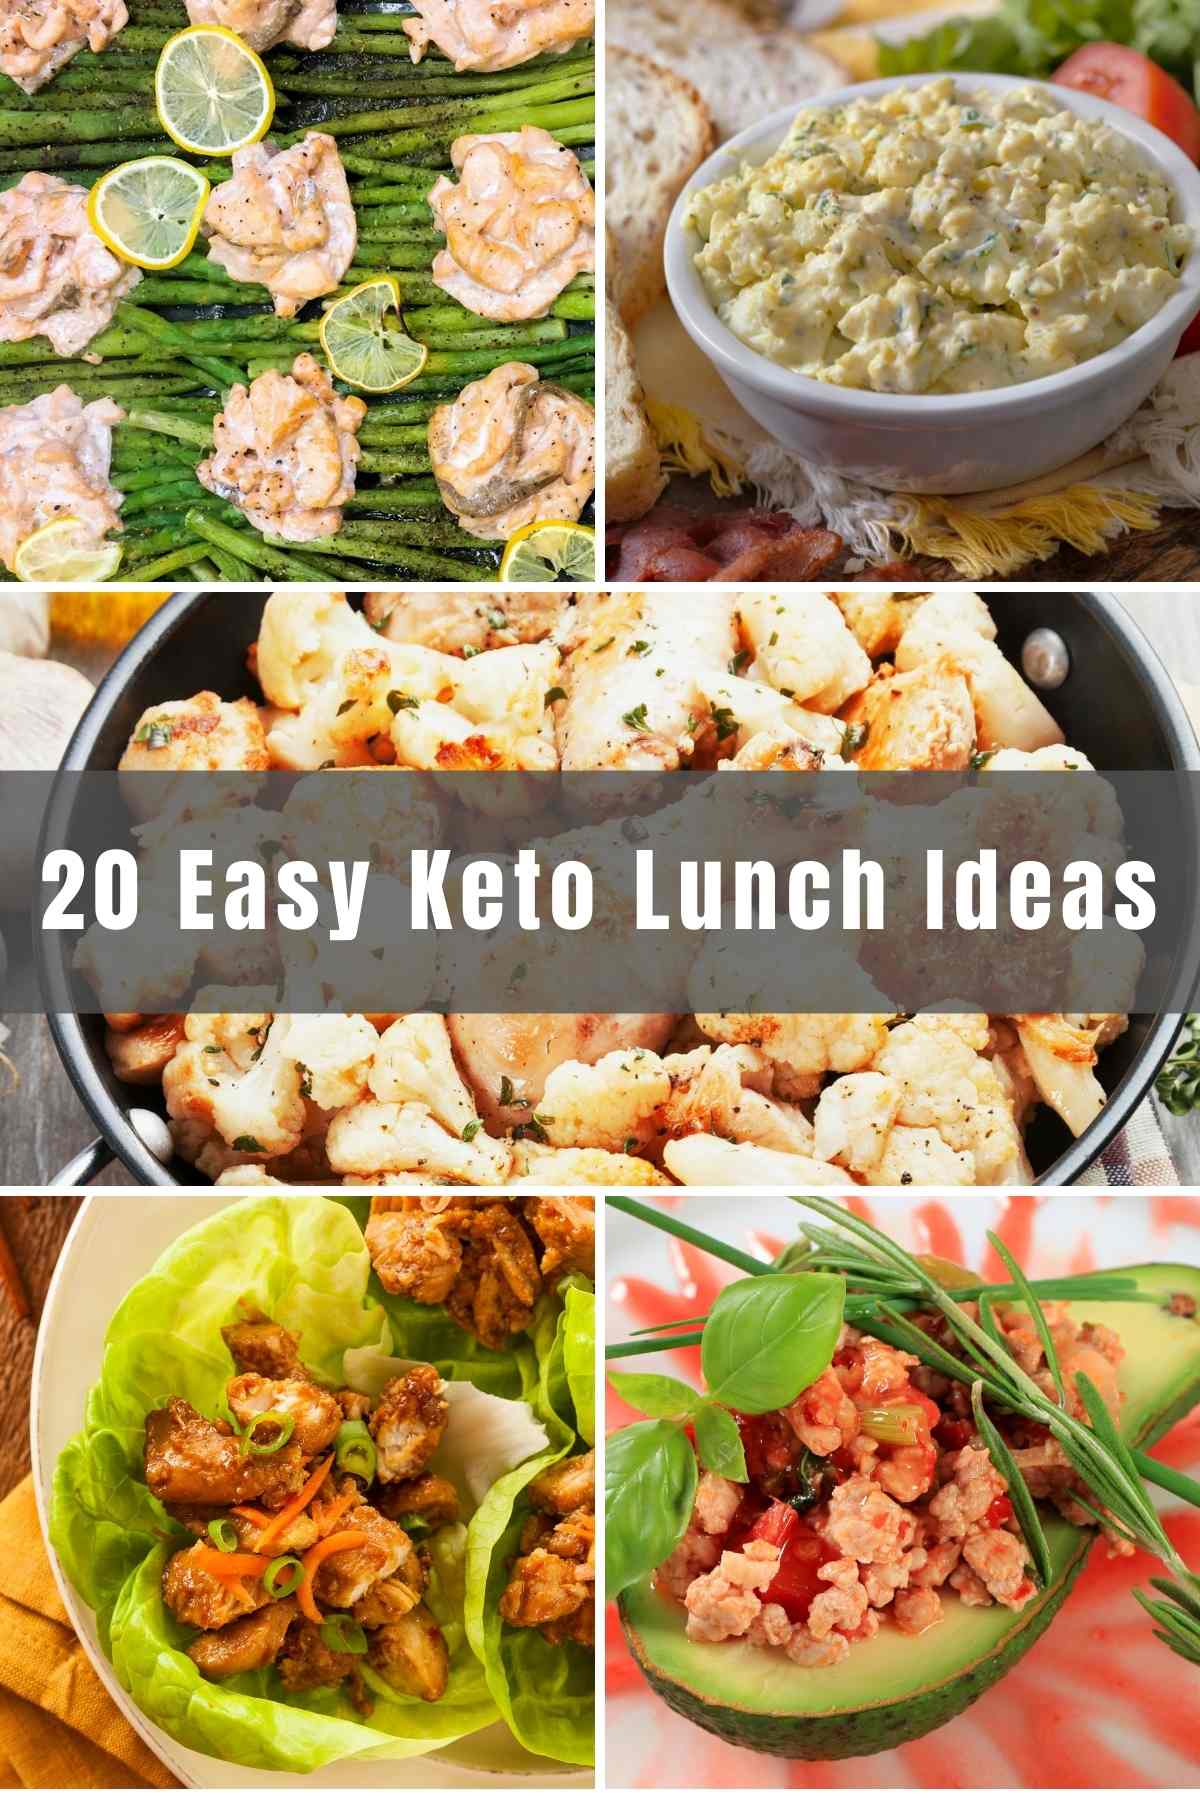 Finding keto-friendly recipes isn’t always an easy task, so we’re here to help! In this article, we’ve collected 20 Easy Keto Lunch Ideas that will satisfy your cravings and fuel you for the rest of the work day. From cold to hot meals, we’ve got you covered!